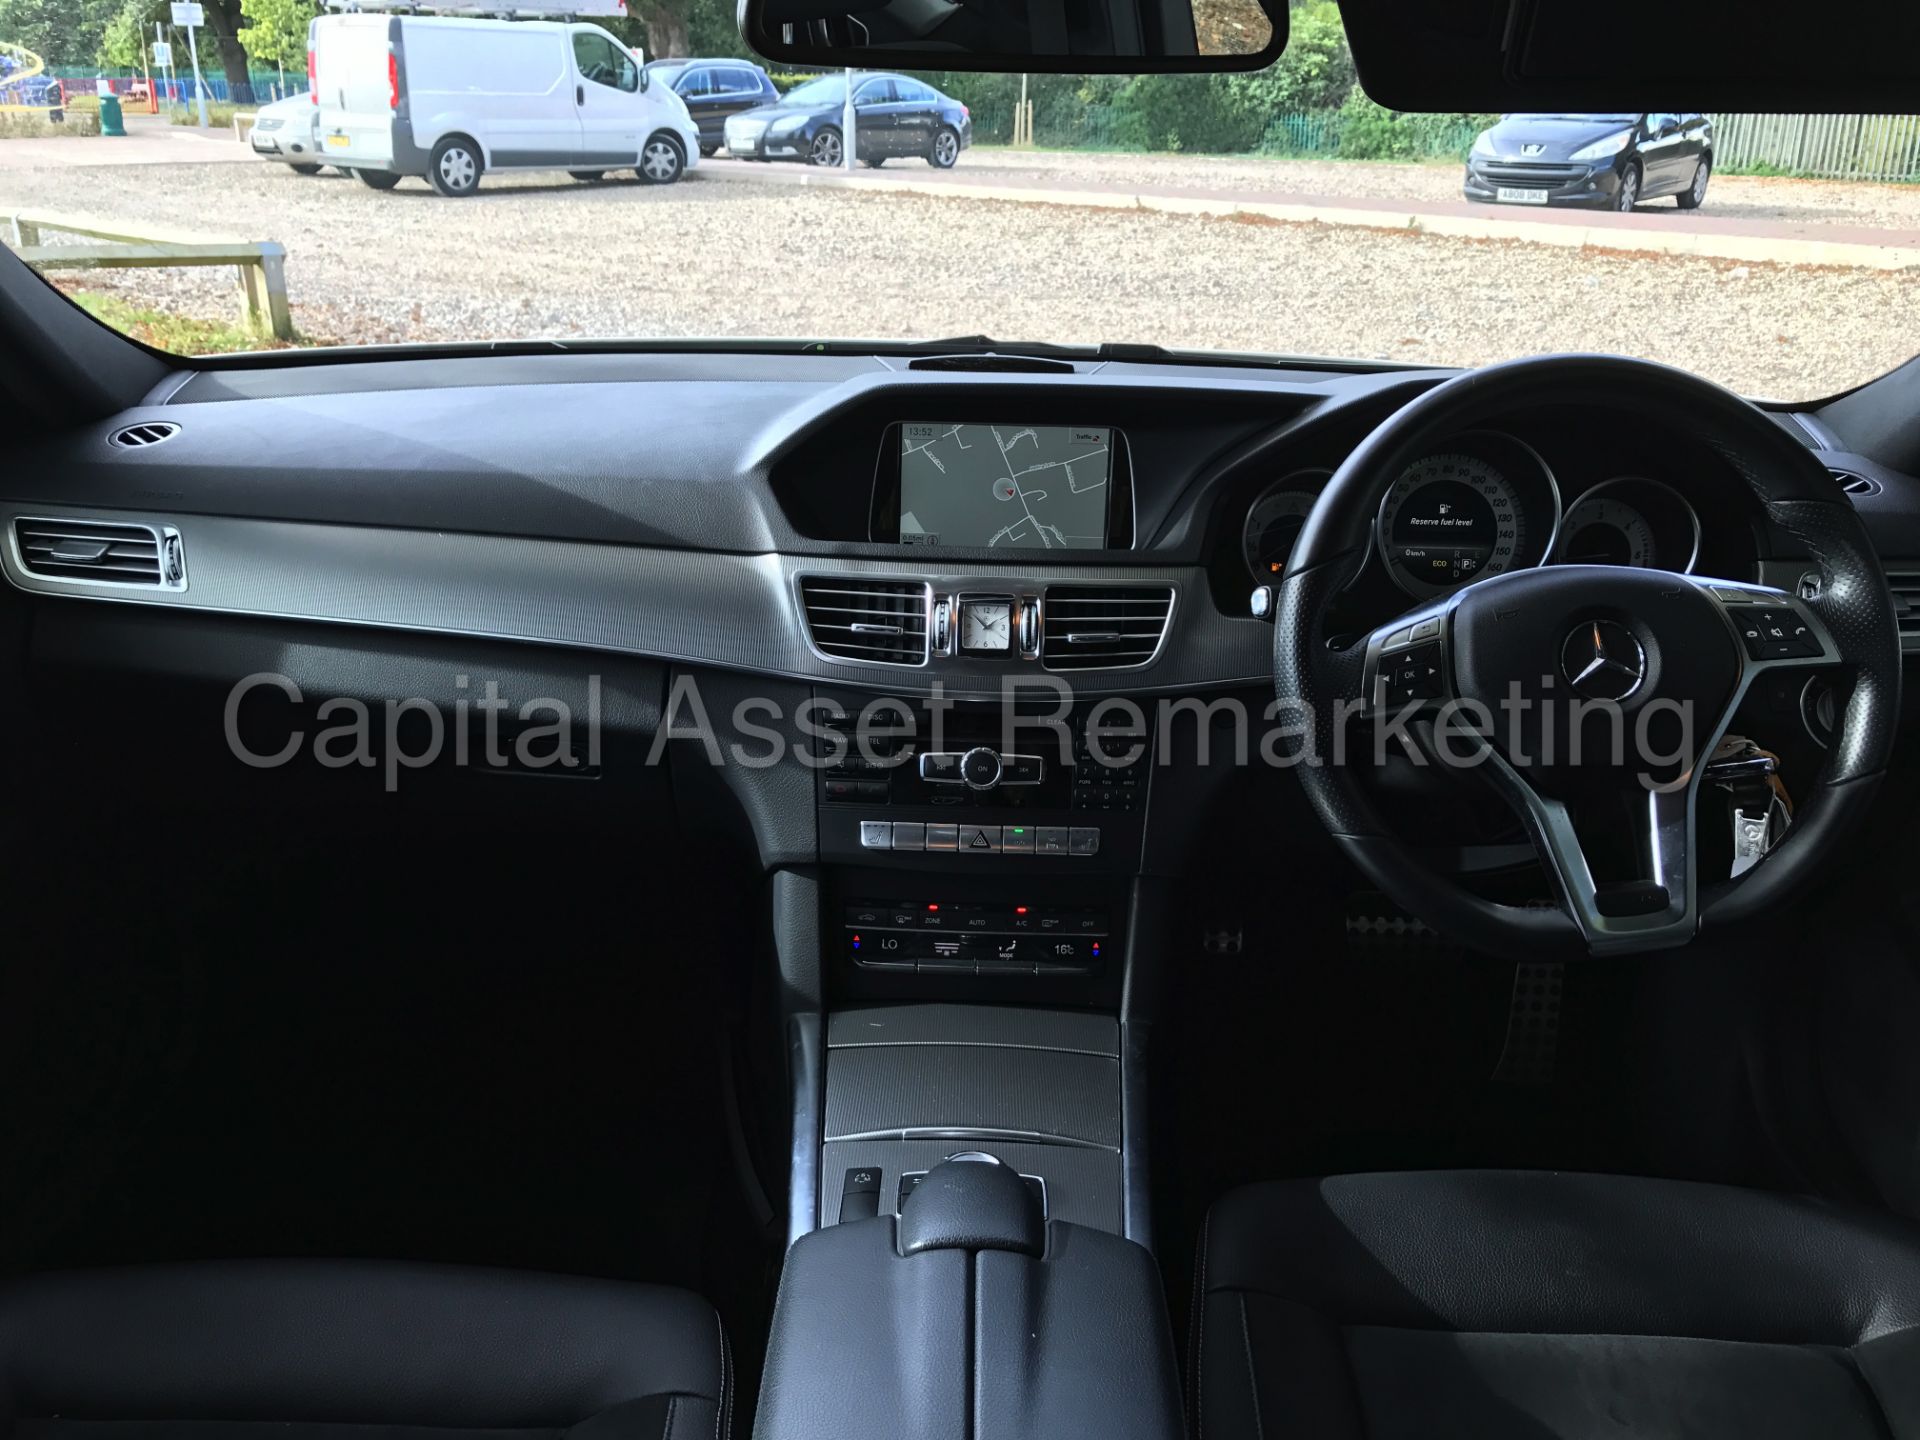 MERCEDES-BENZ E220 'AMG SPORT' (2015 MODEL) 'SALOON - AUTO - PAN ROOF - SAT NAV - LEATHER' *LOOK* - Image 25 of 33